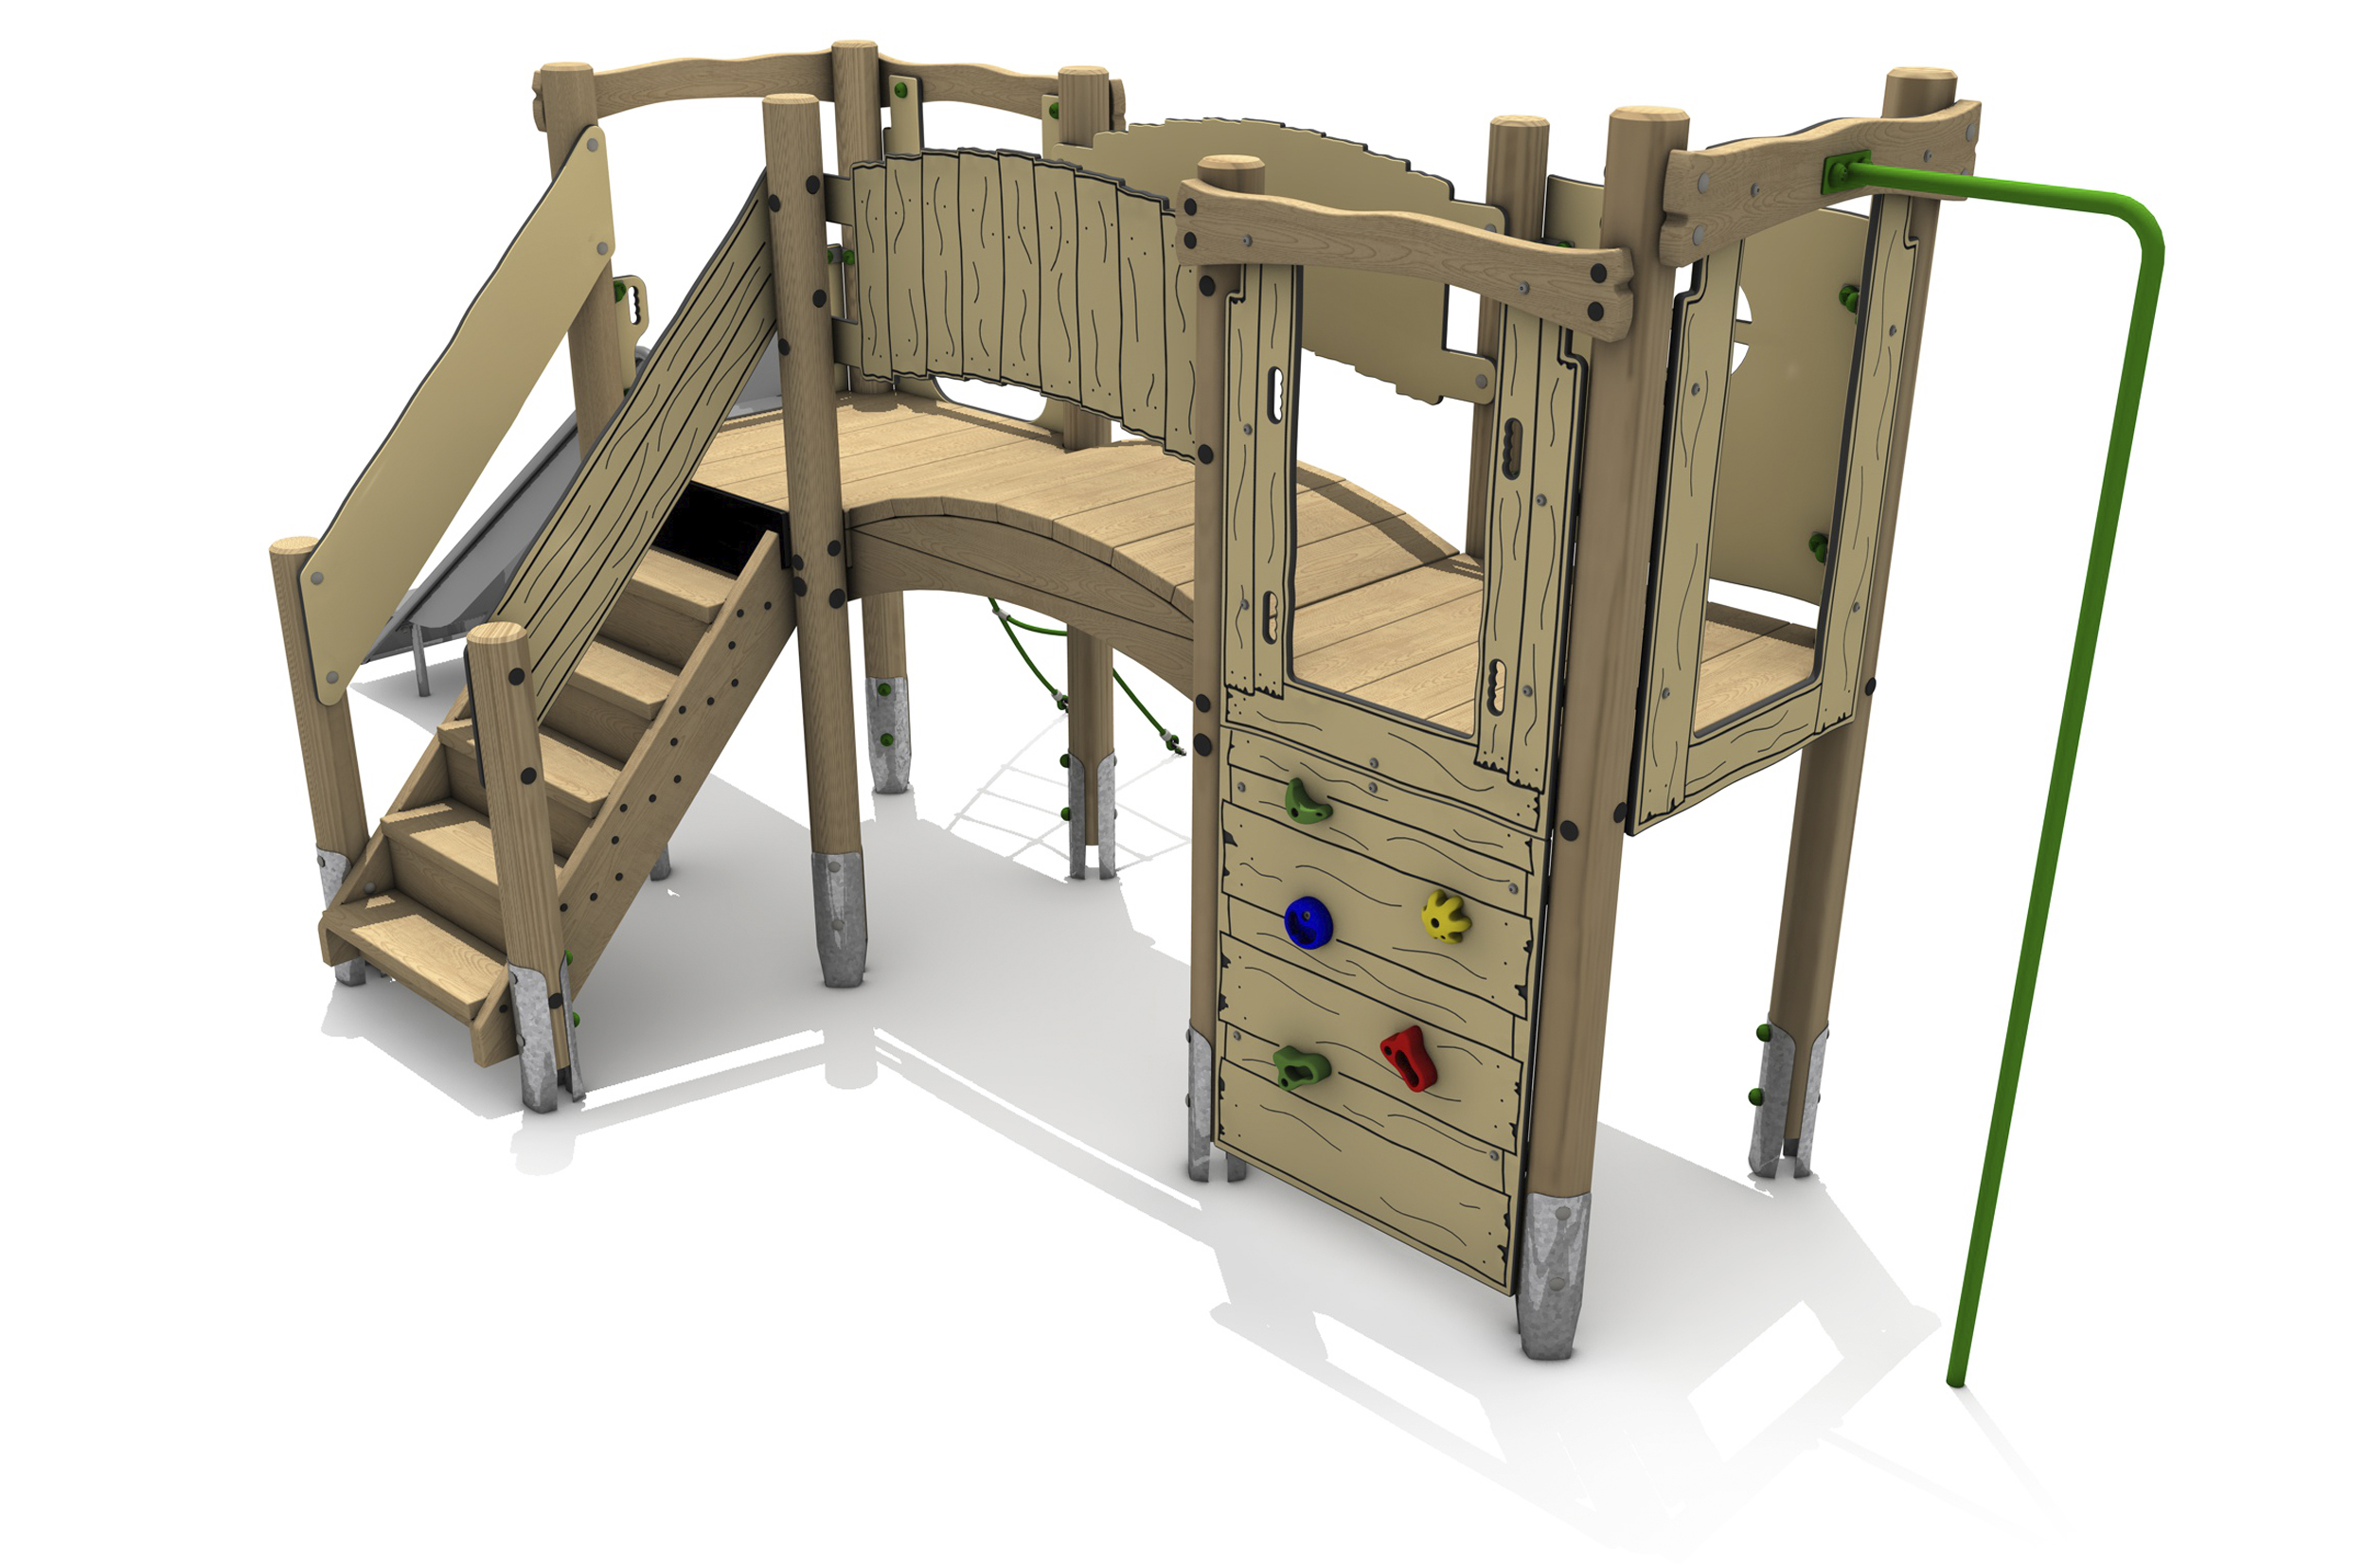 Timber Tower Double Deck 01, A timber tower climber two platform s are linked together with an arched bridge, a set of steps are on the left side, a vertical climb wall with multicoloured hand and foot holds in the middle with a green fire pole on the right side.